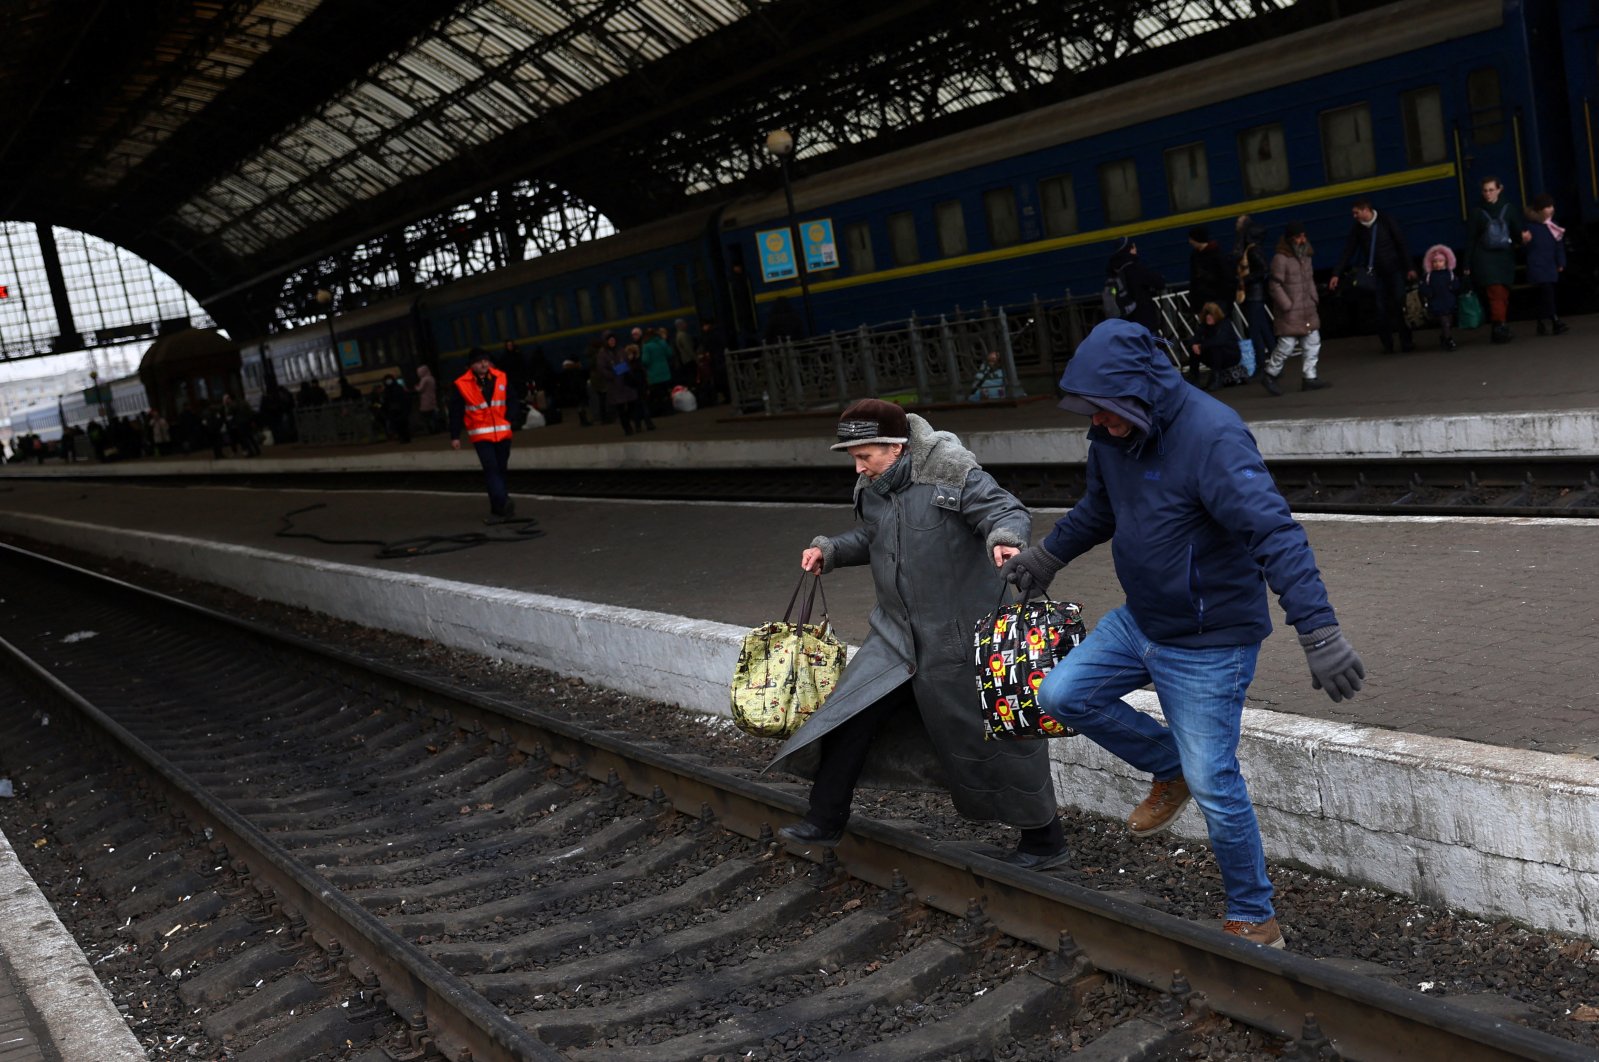 Refugees fleeing the ongoing Russian invasion of Ukraine cross the tracks after arriving on a train from Kyiv region at the train station in Lviv, Ukraine, March 8, 2022. (Reuters Photo)